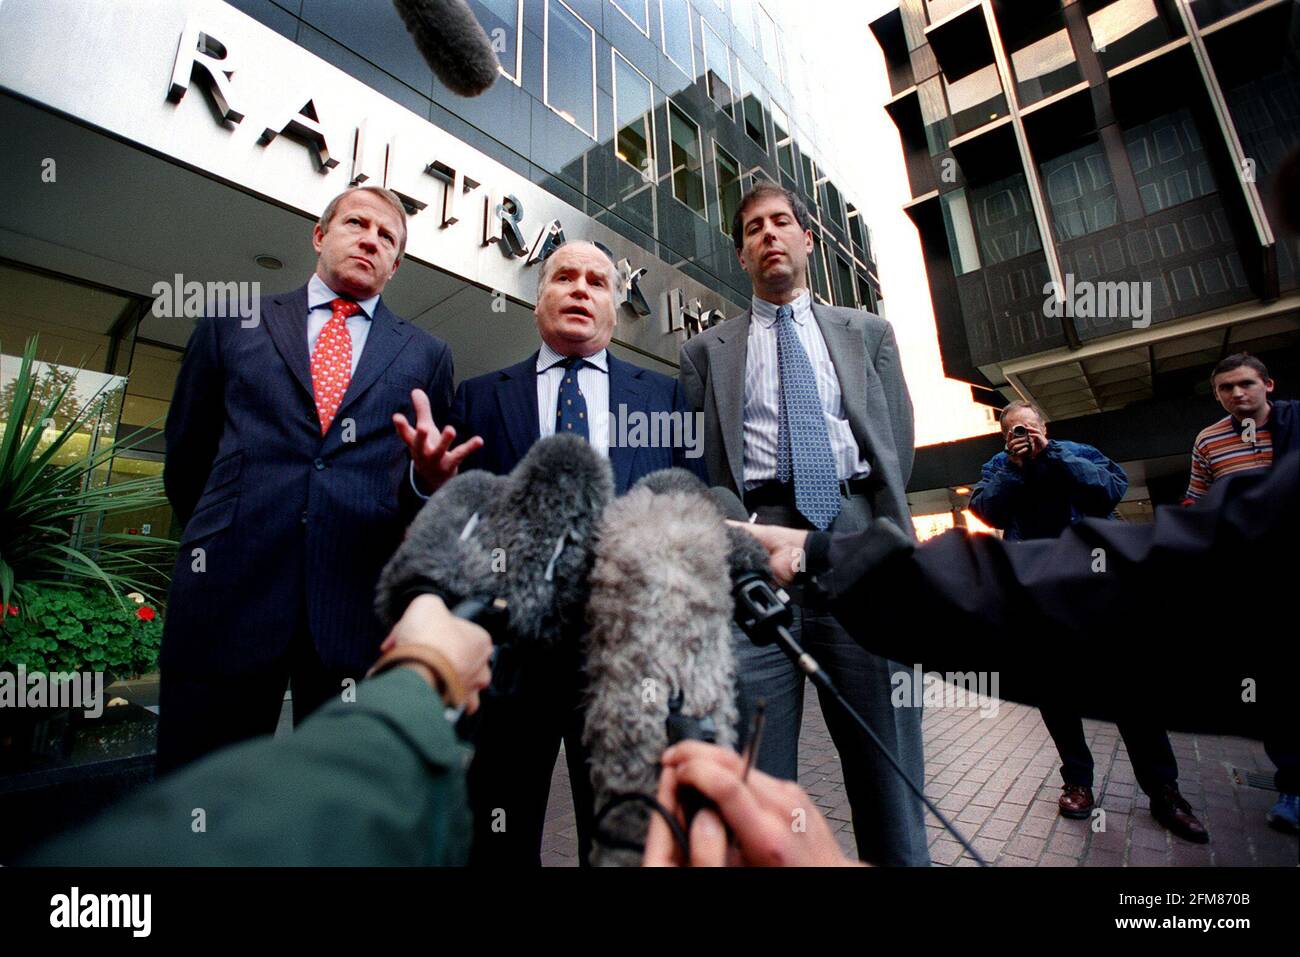 Gerald Corbett, Chief Executive of Railtrack, flanked by Richard Middleton, Commercial Director, (left) and Jonson Cox, Operations Director, making a statement this evening outside the Railtrack office in London. Stock Photo